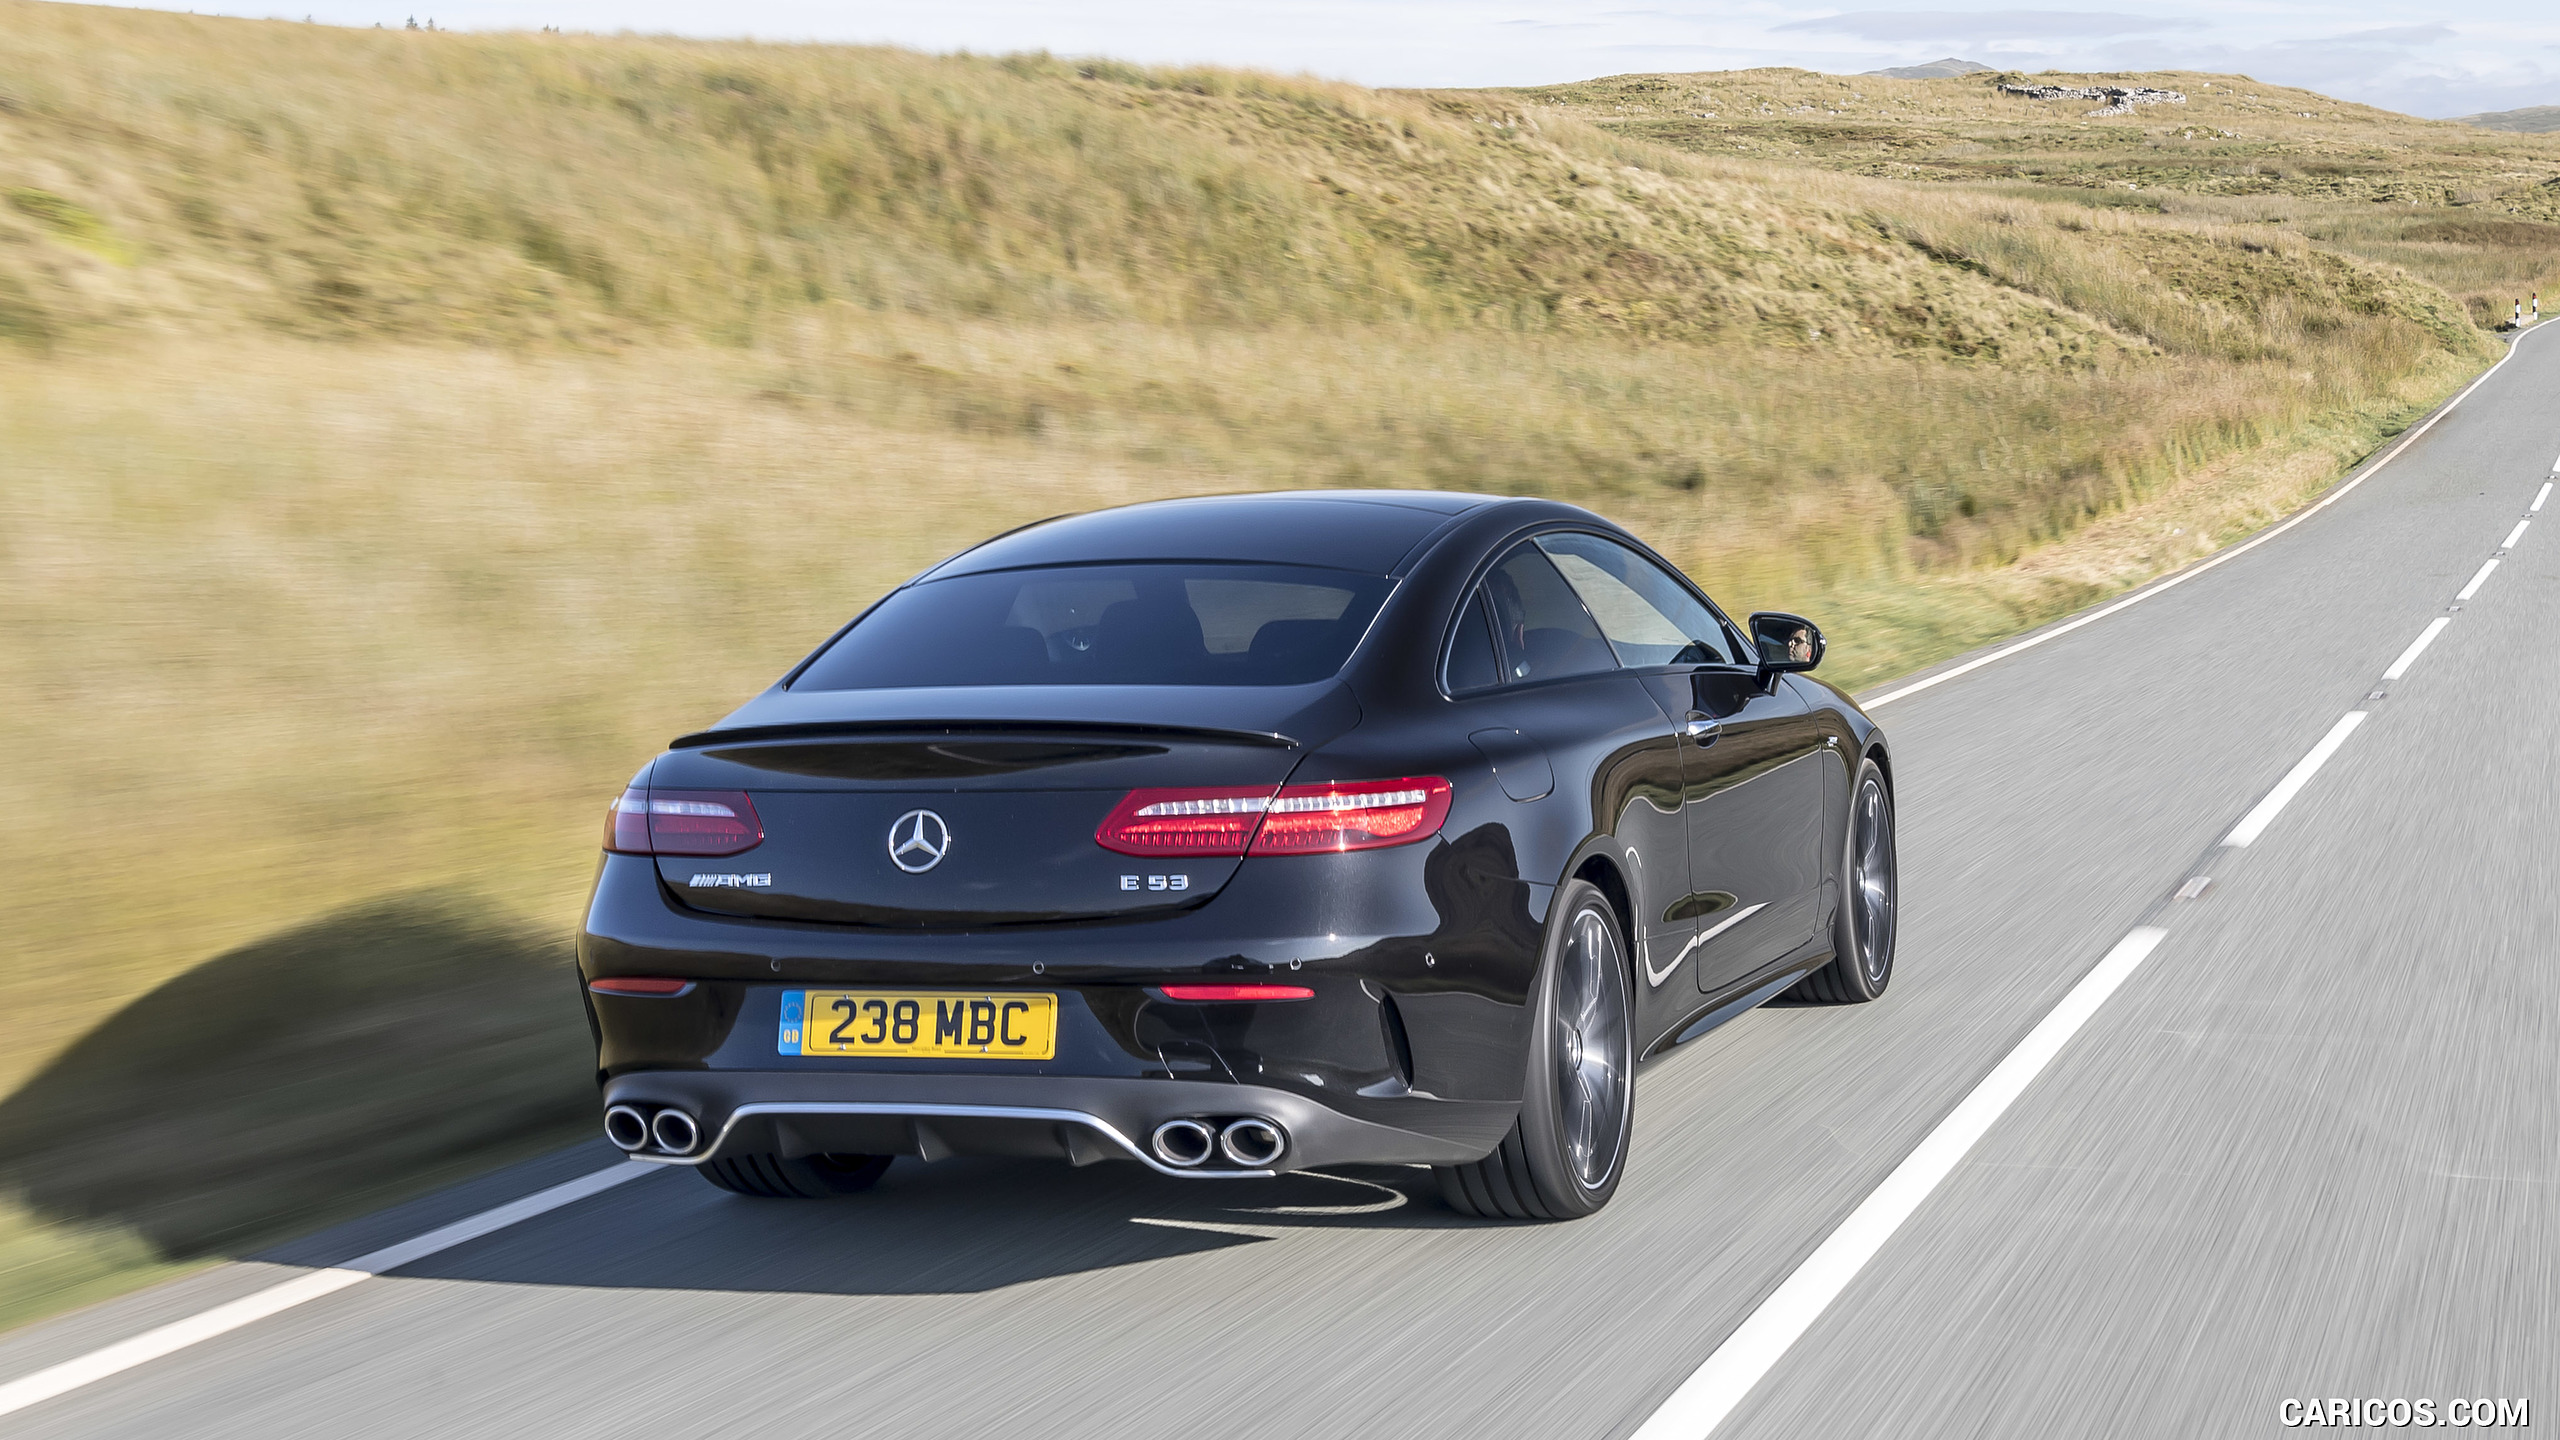 2019 Mercedes-AMG E 53 Coupe (UK-Spec) - Rear, #15 of 166